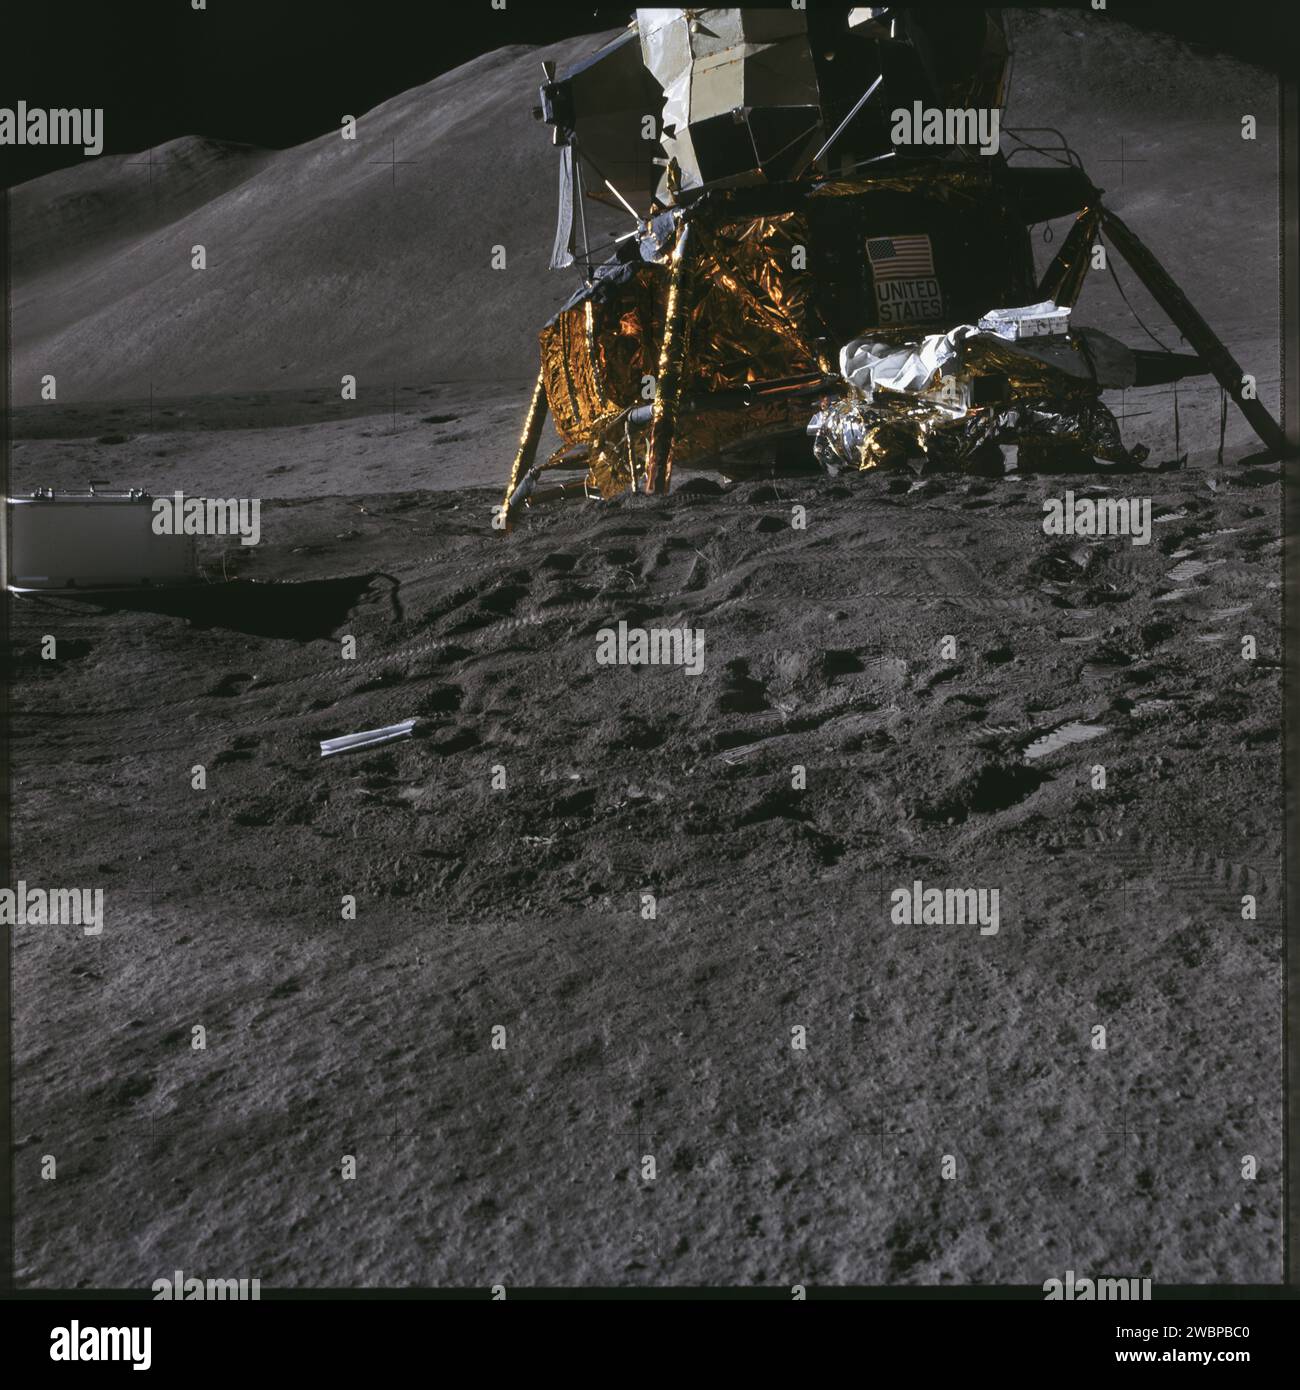 AS15-86-11600 (31 July 1971) --- A view of the Lunar Module (LM) 'Falcon' taken early in the first Apollo 15 lunar surface extravehicular activity (EVA) at the Hadley-Apennine landing site prior to deployment of lunar surface equipment. Hadley Delta Mountain is in the background. While astronauts David R. Scott, commander and James B. Irwin, lunar module pilot, descended in the LM to explore the moon, astronaut Alfred M. Worden, command module pilot, remained with the Command and Service Modules (CSM) in lunar orbit. Stock Photo